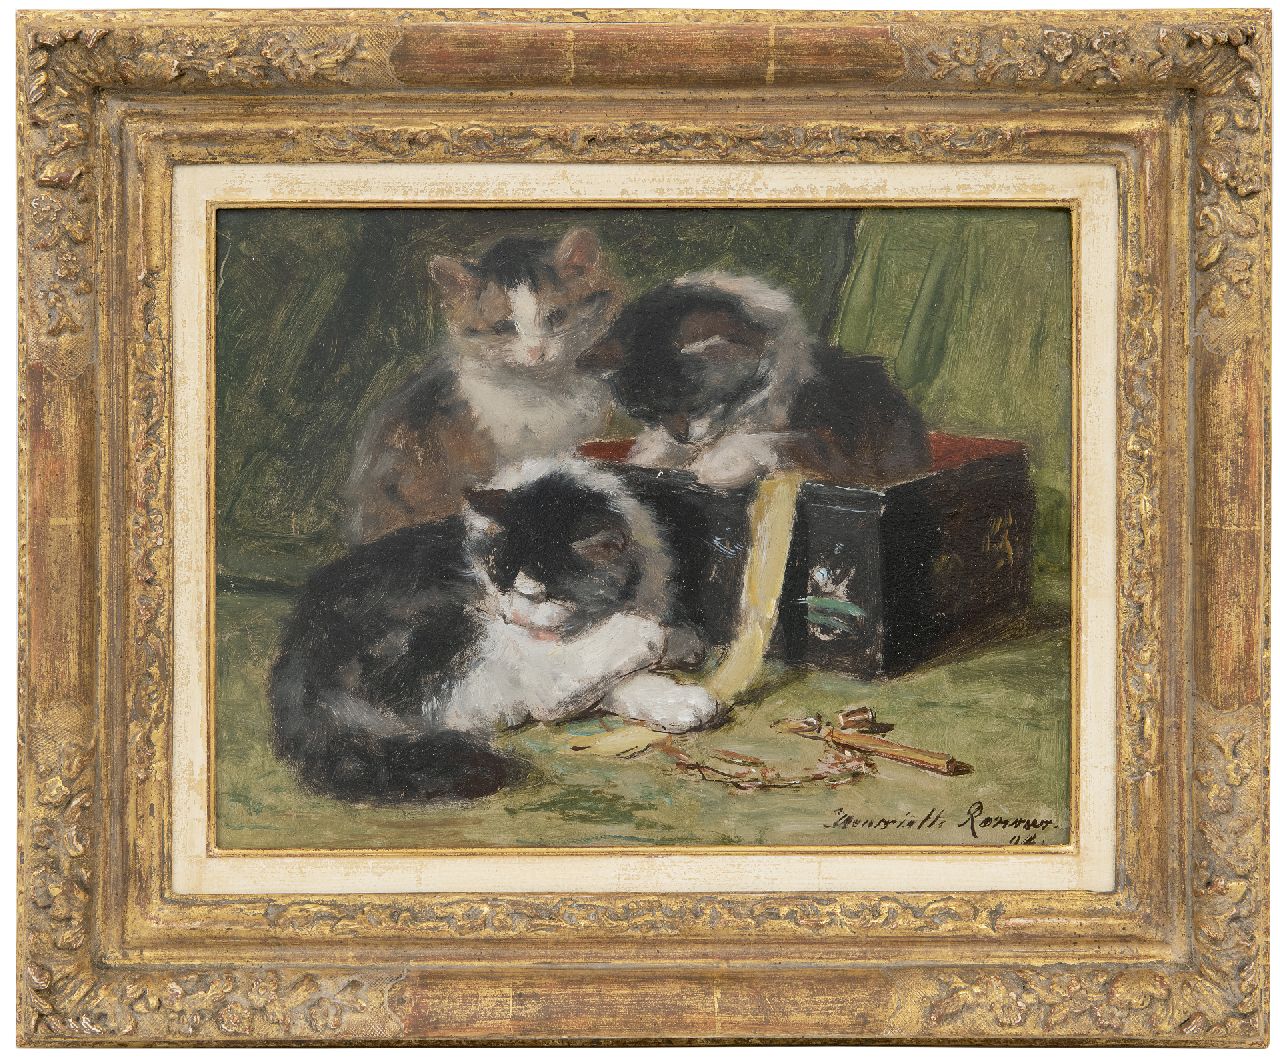 Ronner-Knip H.  | Henriette Ronner-Knip, Kittens playing with a sweing box, oil on panel 25.0 x 33.5 cm, signed l.r. and dated '94